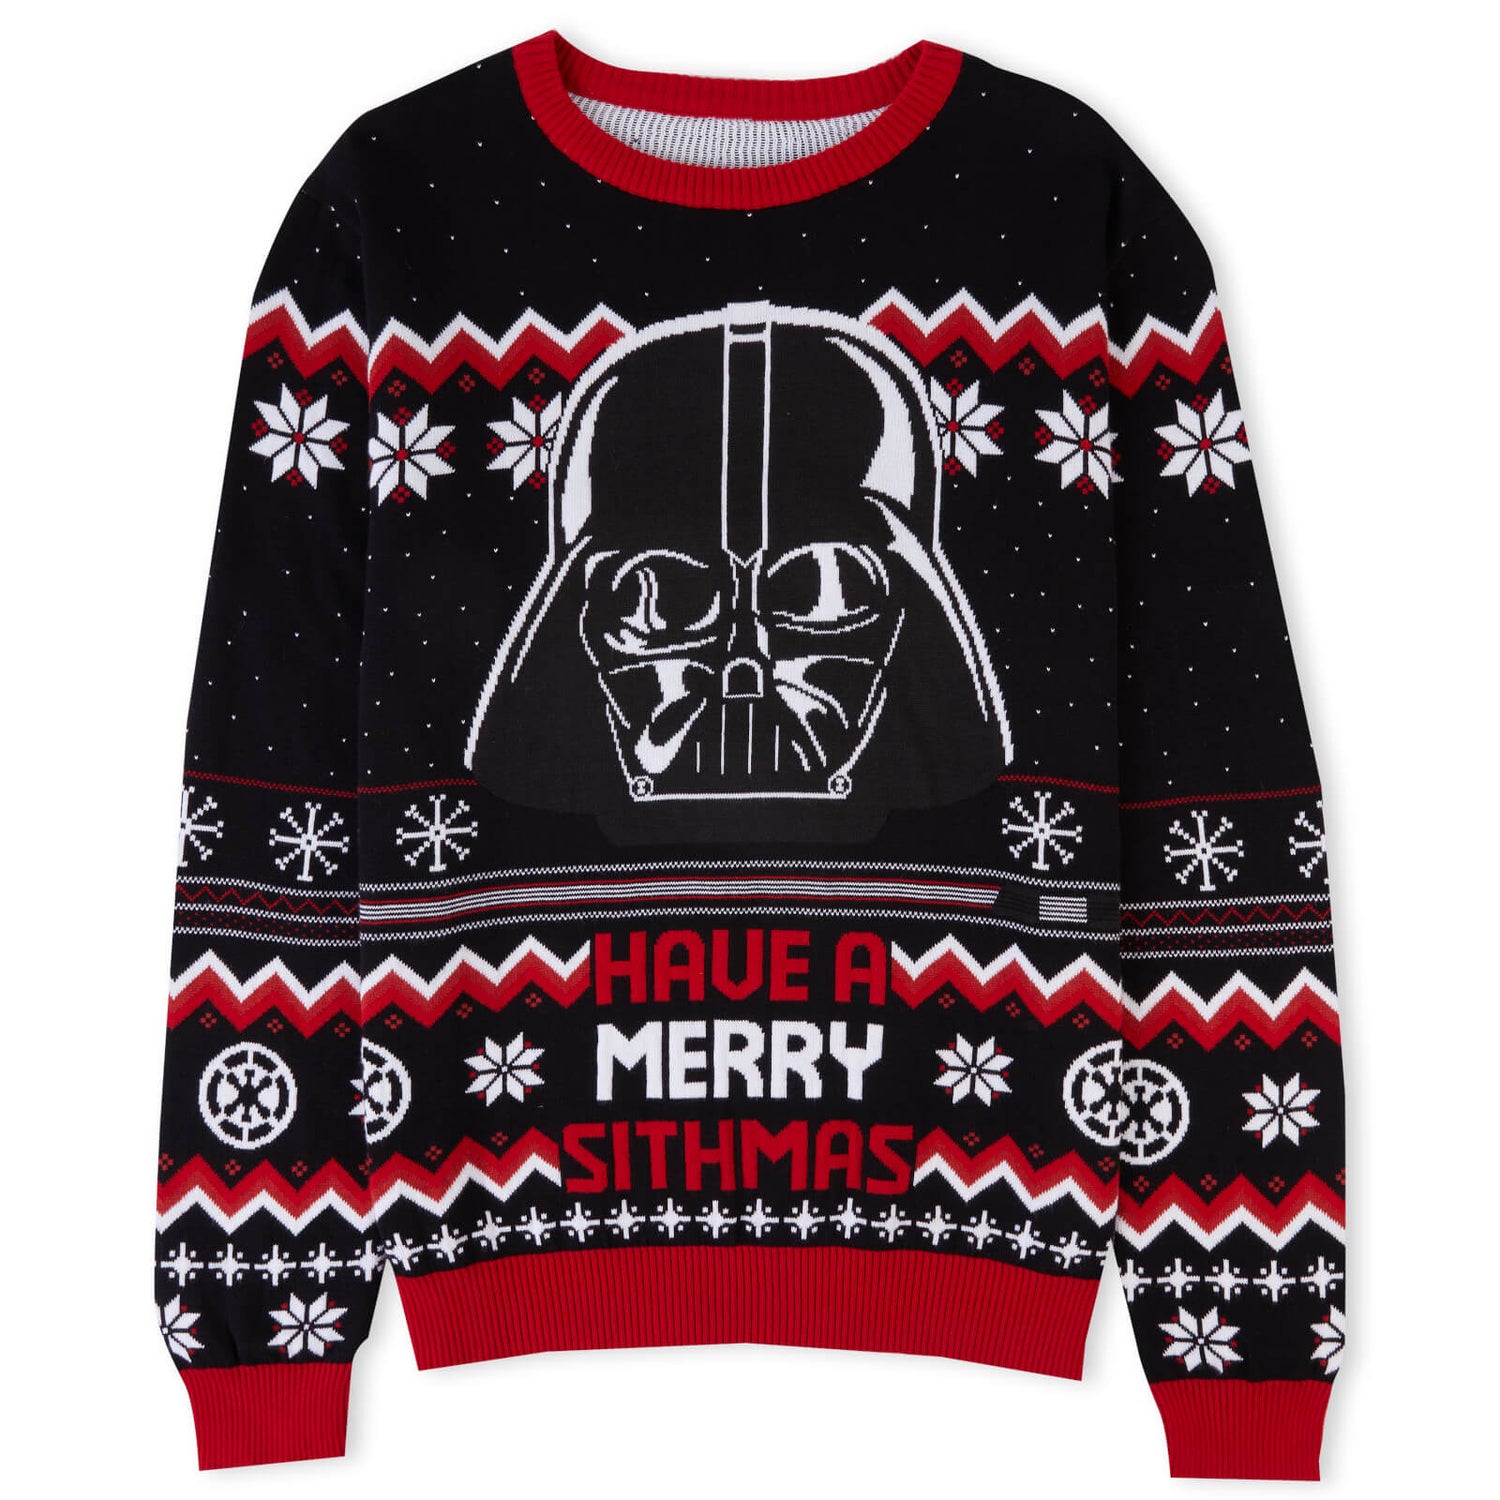 Have a Merry Sithmas Christmas Knitted Jumper Black